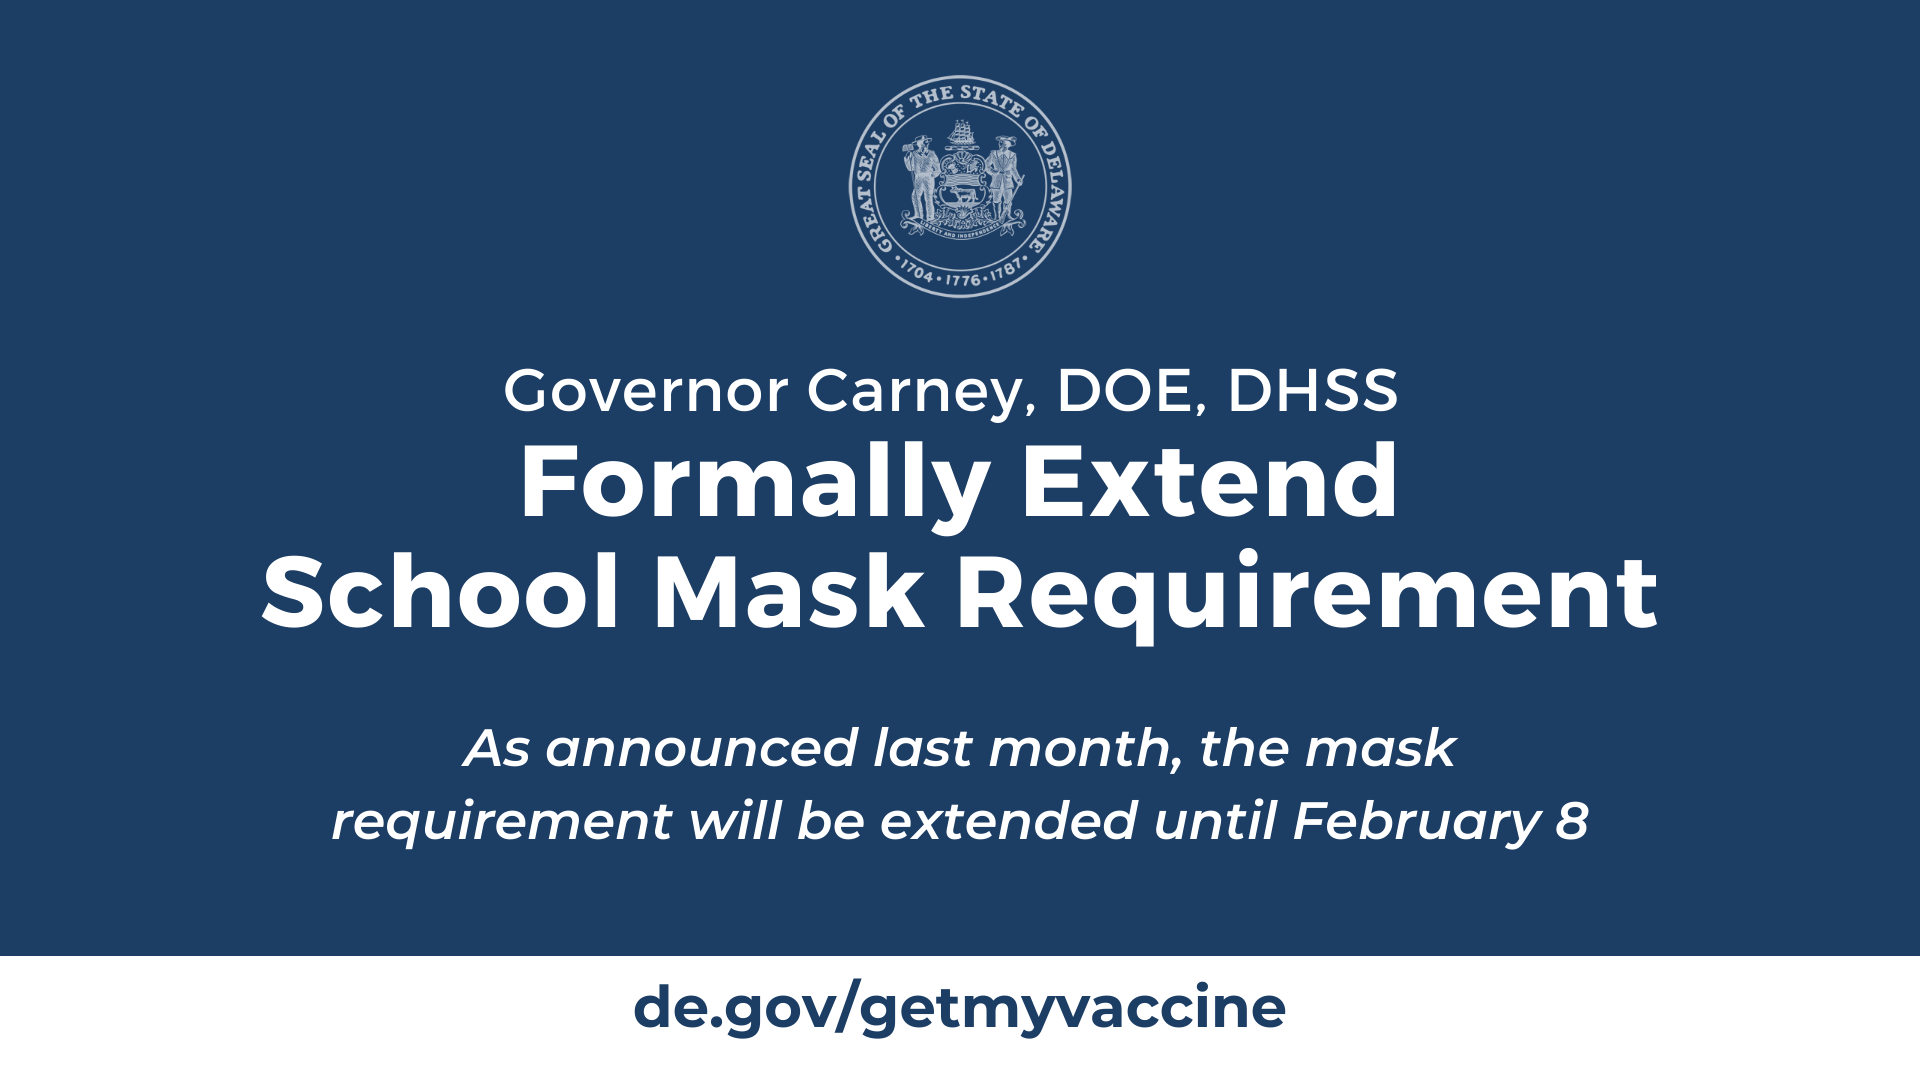 Governor Carney, DOE, DHSS Formally Extend School Mask Requirement. As announced last month, the mask requirement will be extended until February 8.